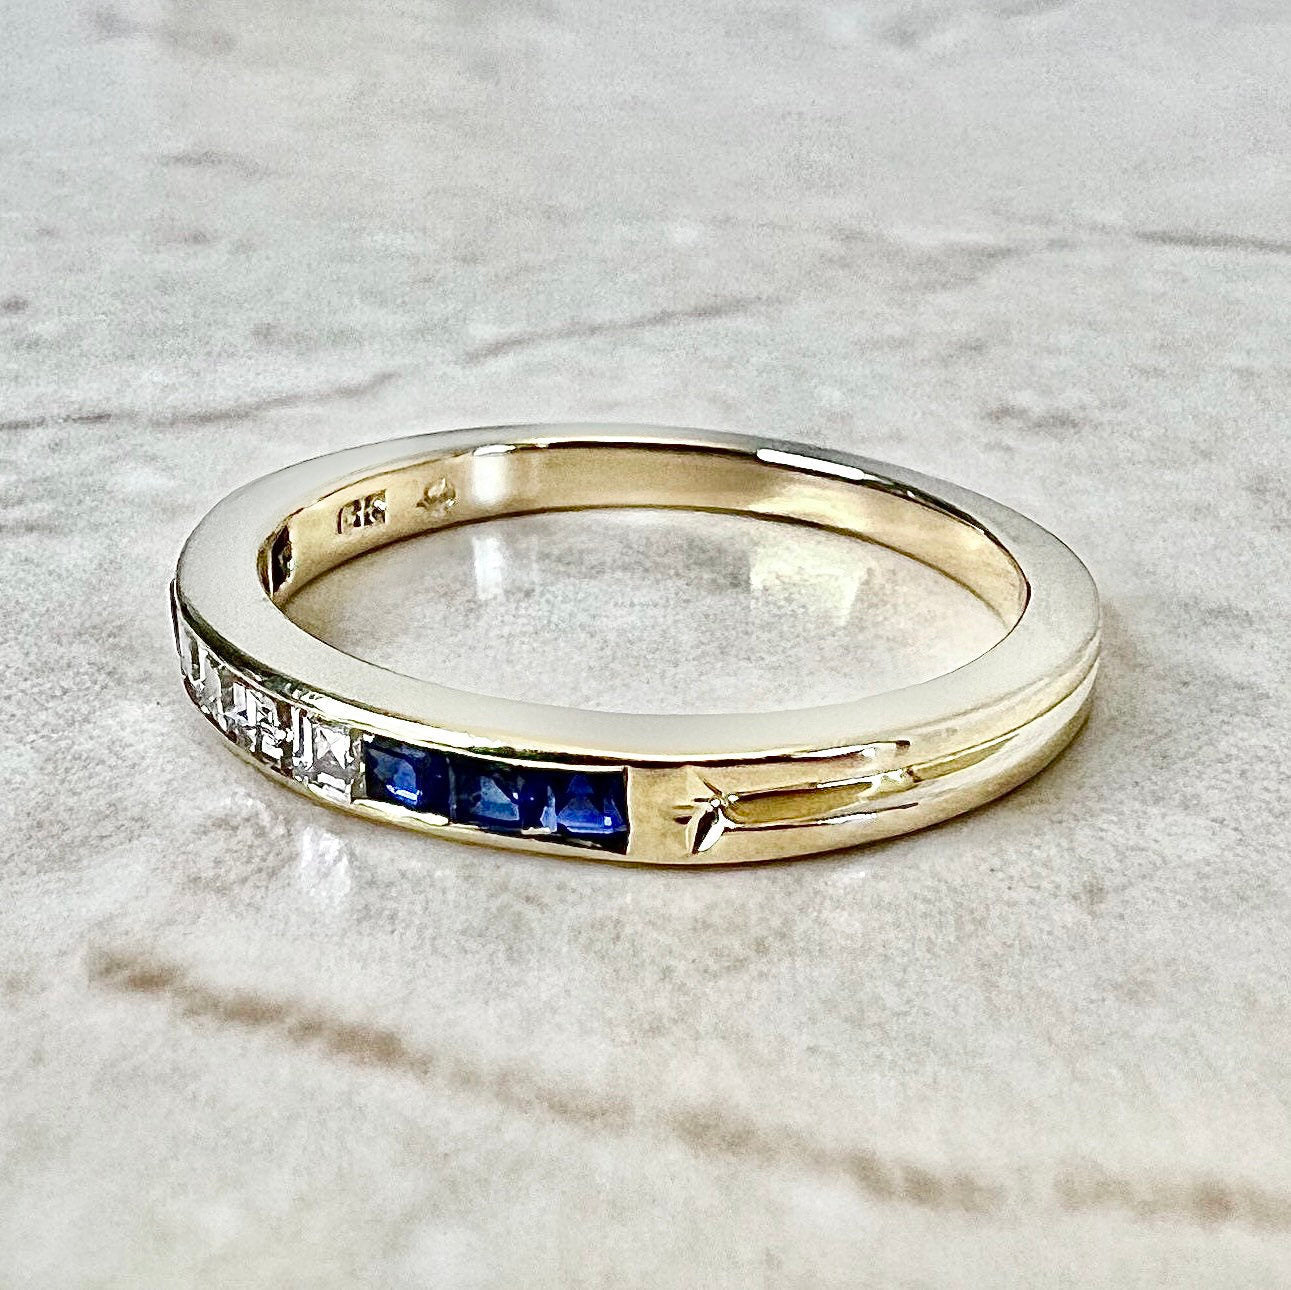 Men's 14K Two Tone Gold Sapphire Band Ring